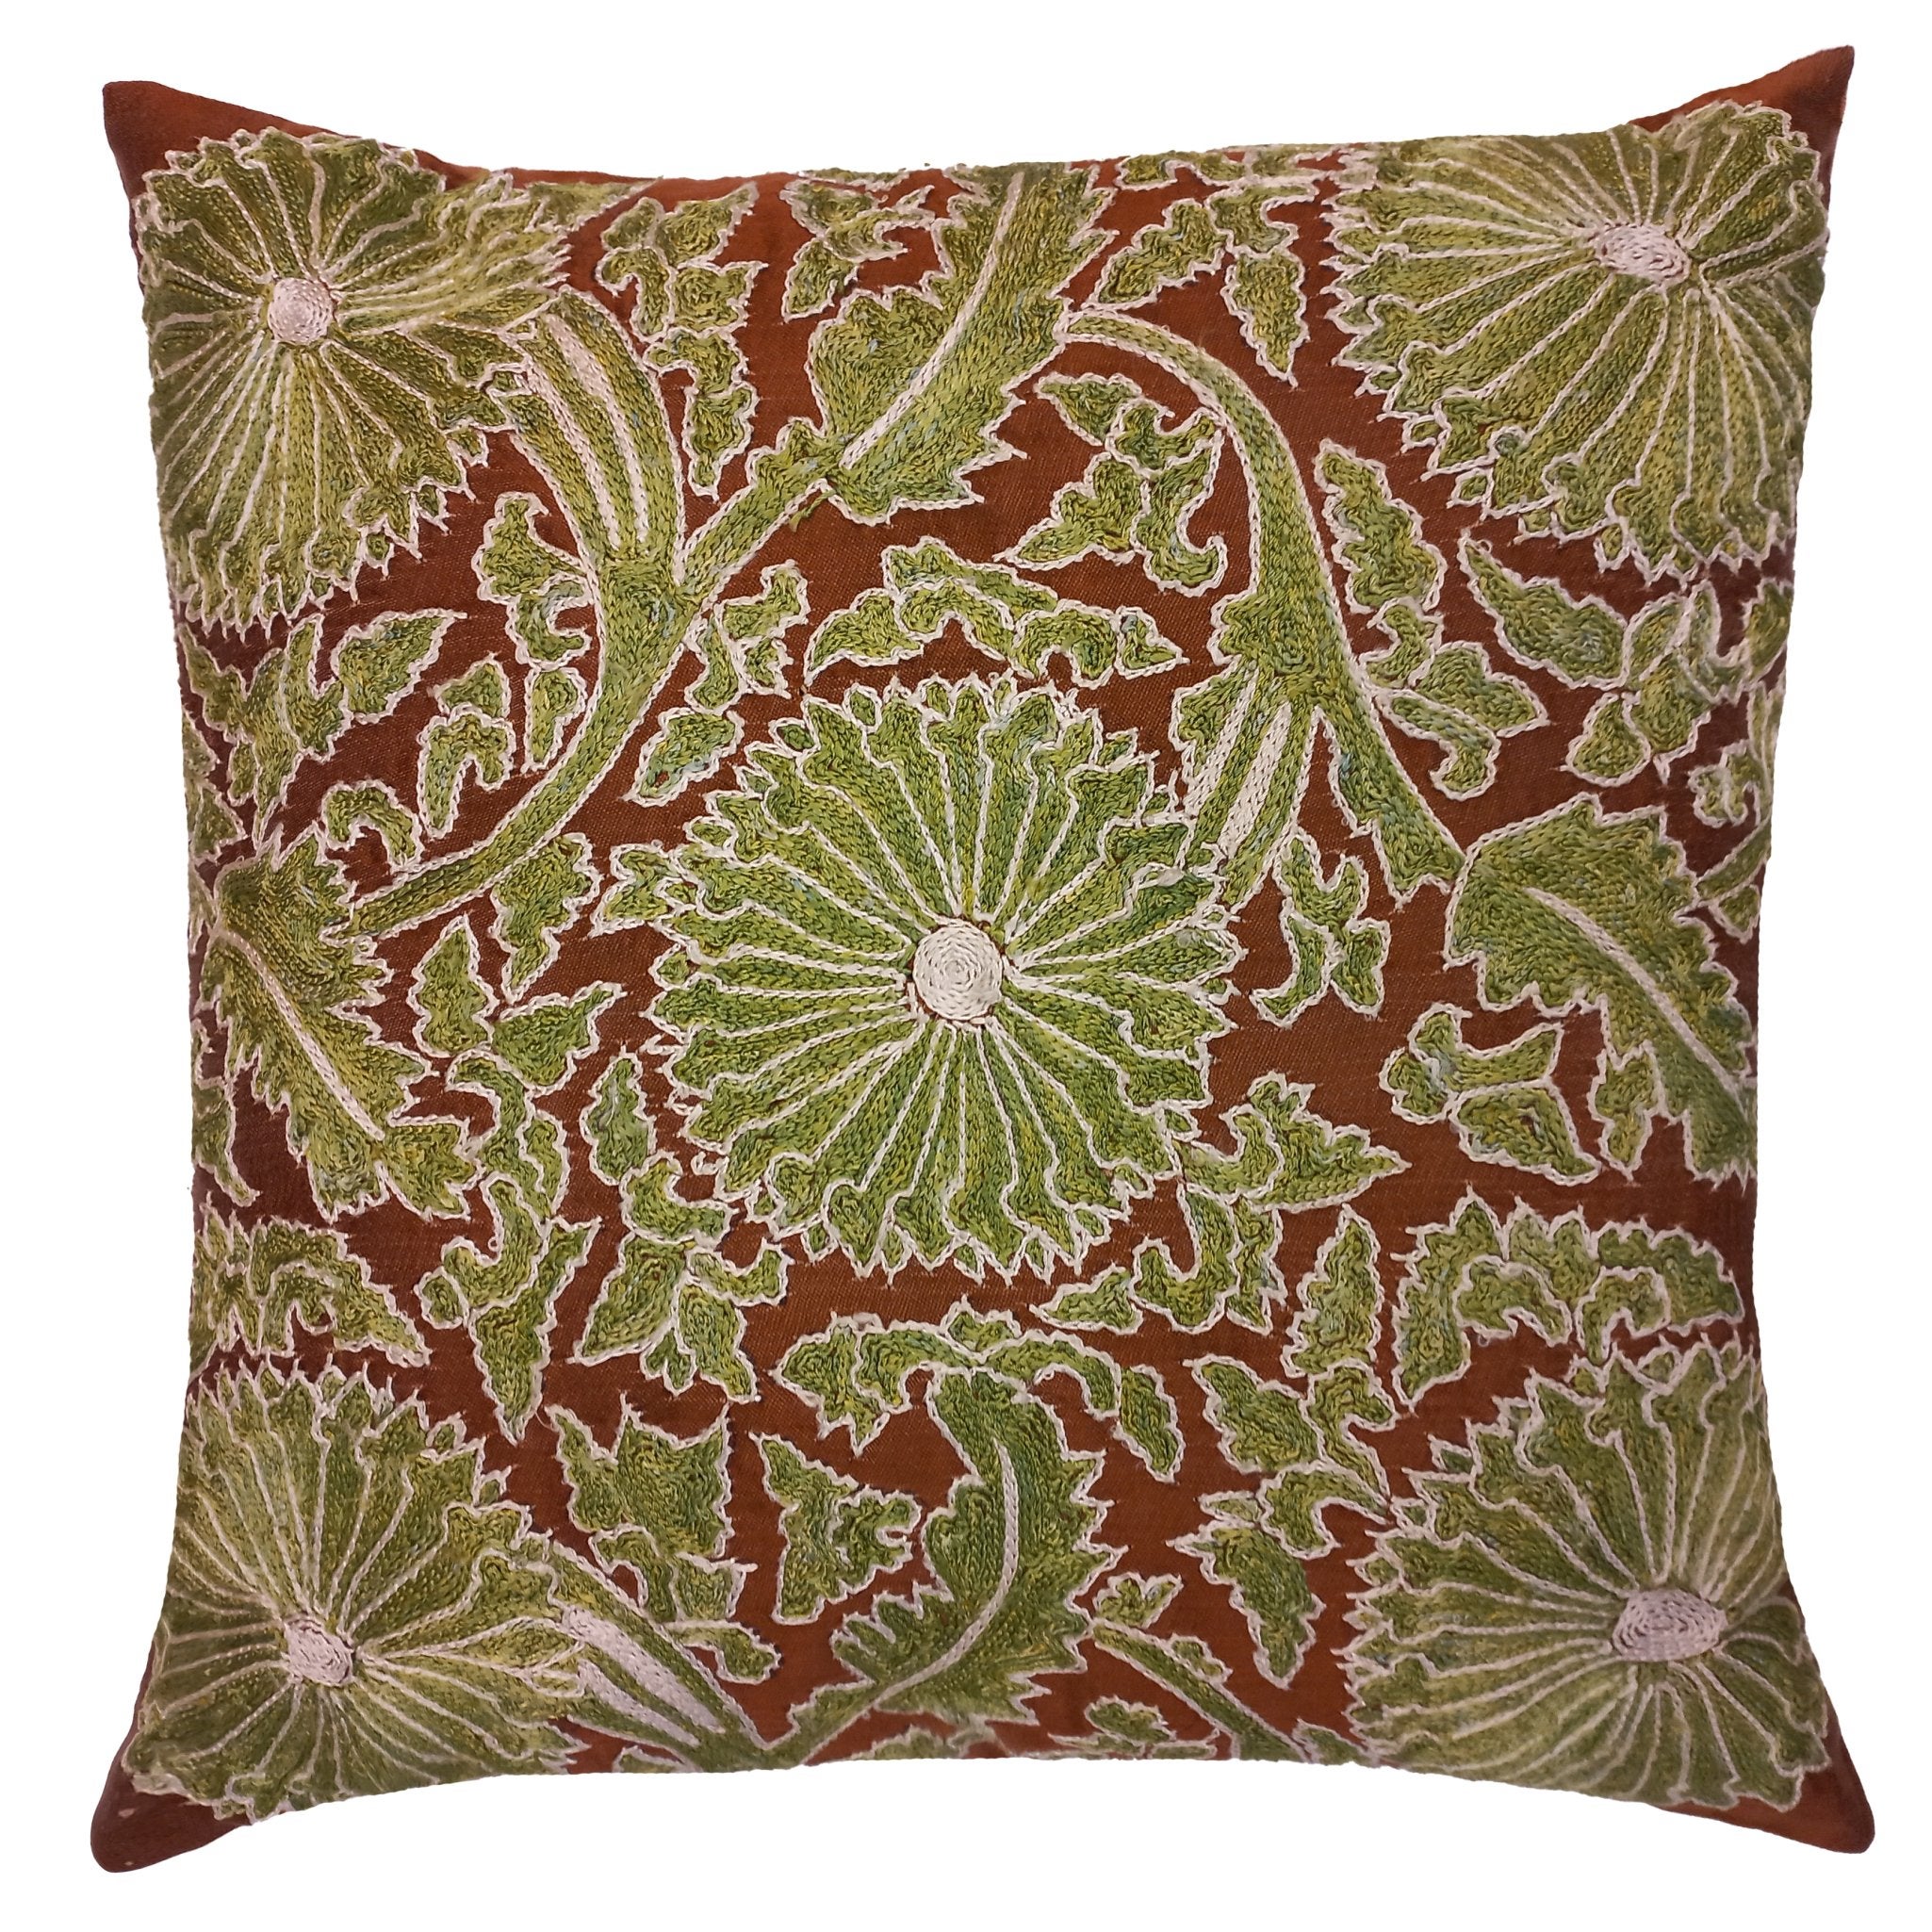 19"x19" Authentic 100% Silk Embroidered Suzani Cushion Cover in Brown & Green